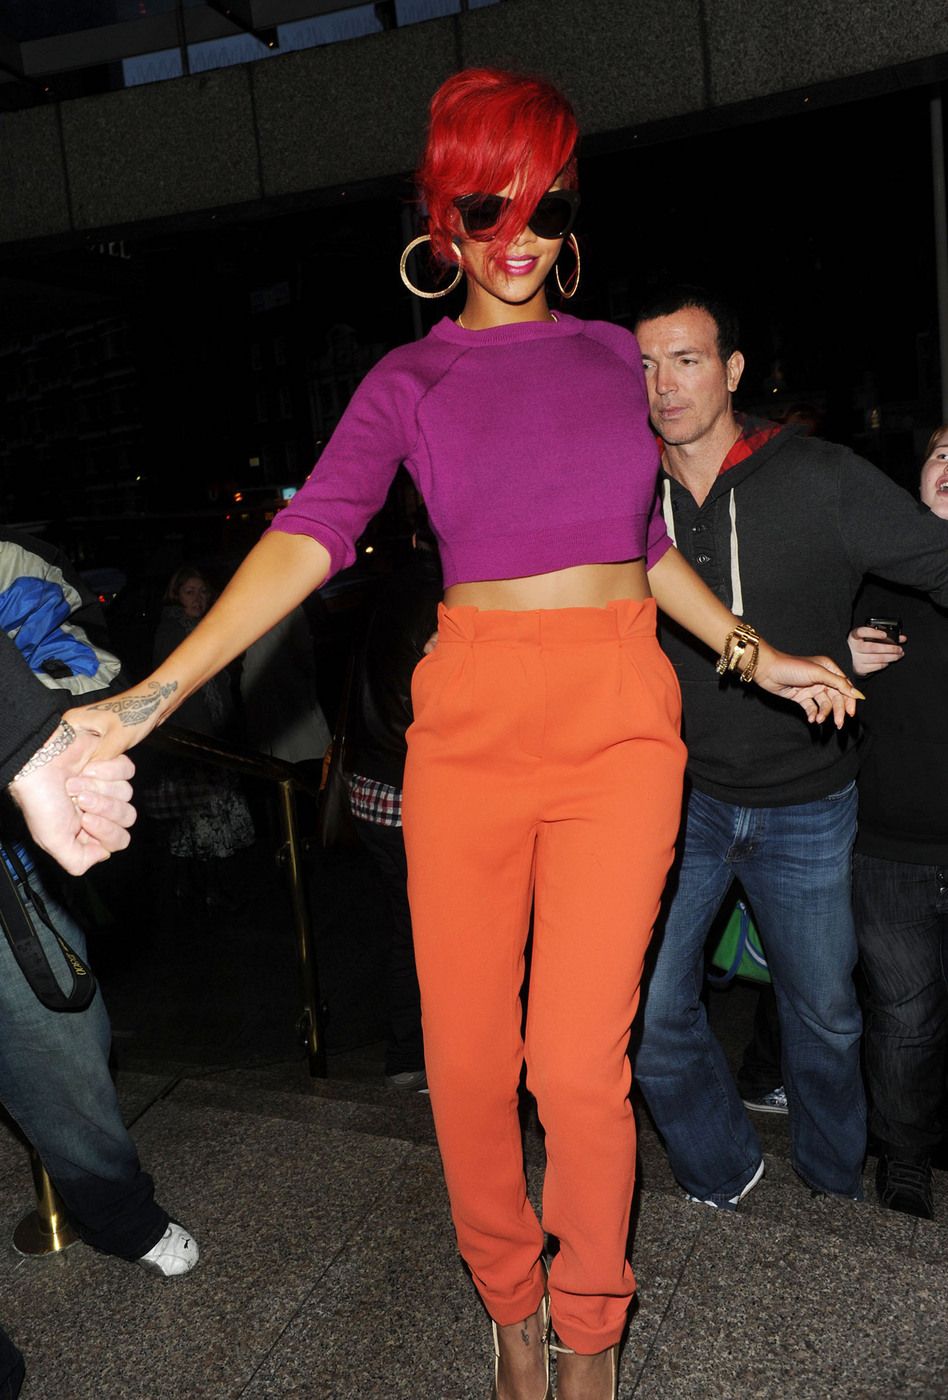 Rihanna arrives at Kiss FM Studios in a colorful outfit to match her hairstyle